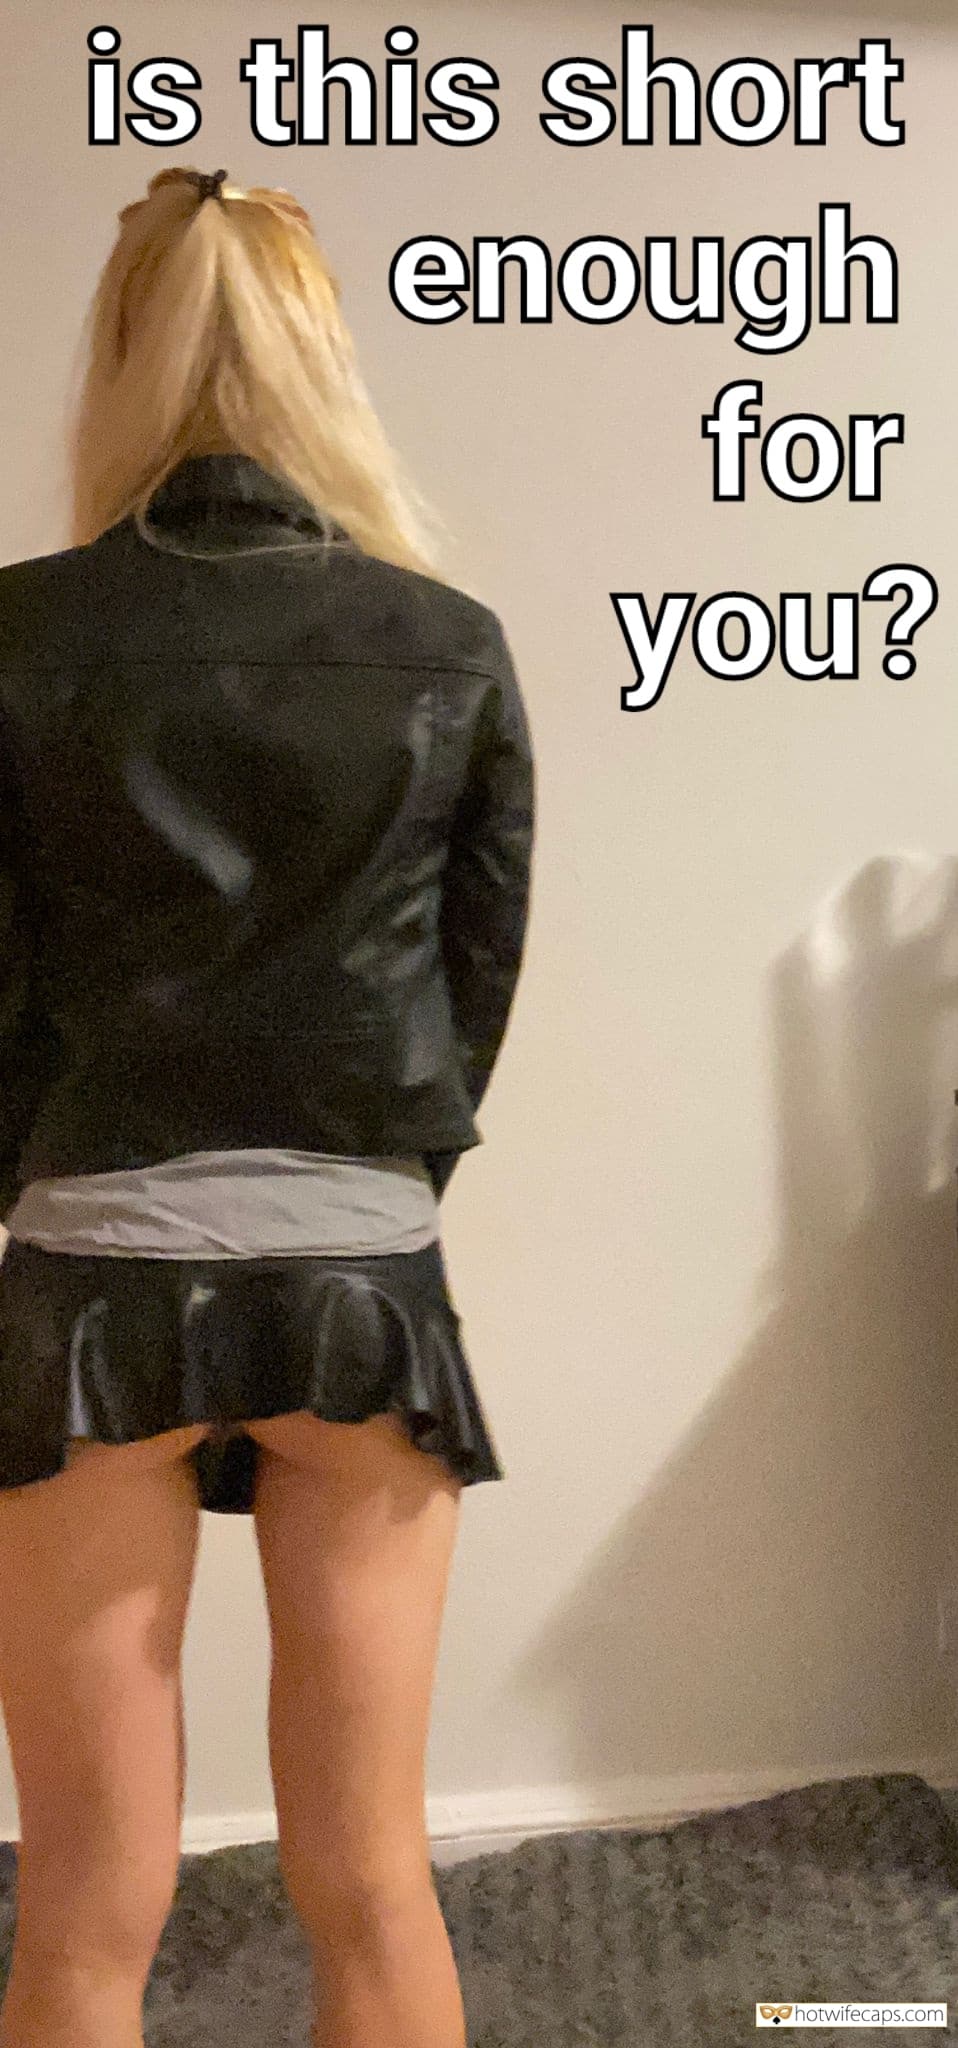 mini skirt no panties captions, memes and dirty quotes on HotwifeCaps